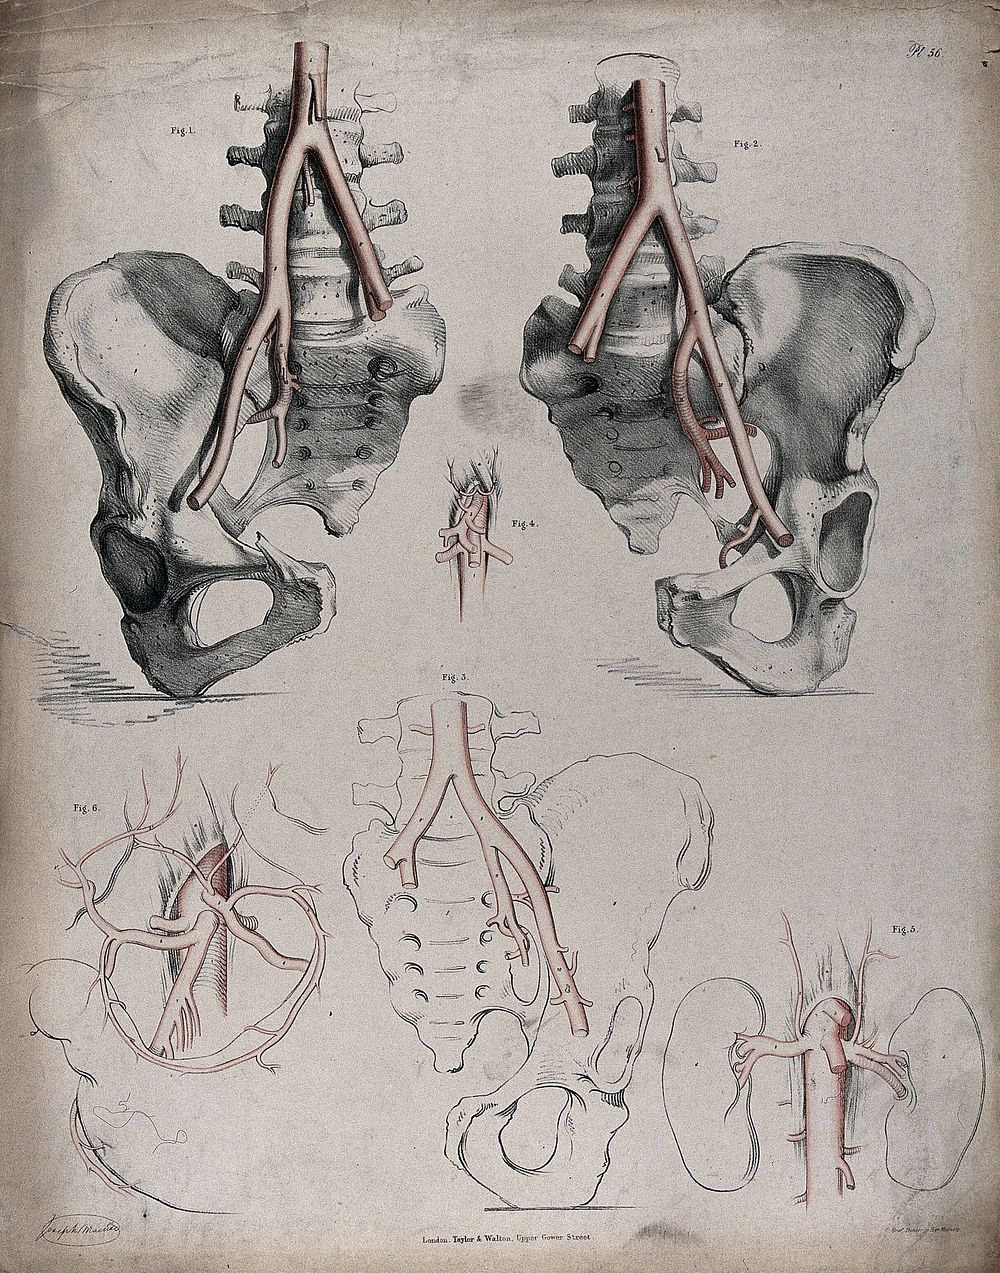 The circulatory system: dissections of the pelvic bones and diagrams showing the kidneys and intestines, with the arteries…